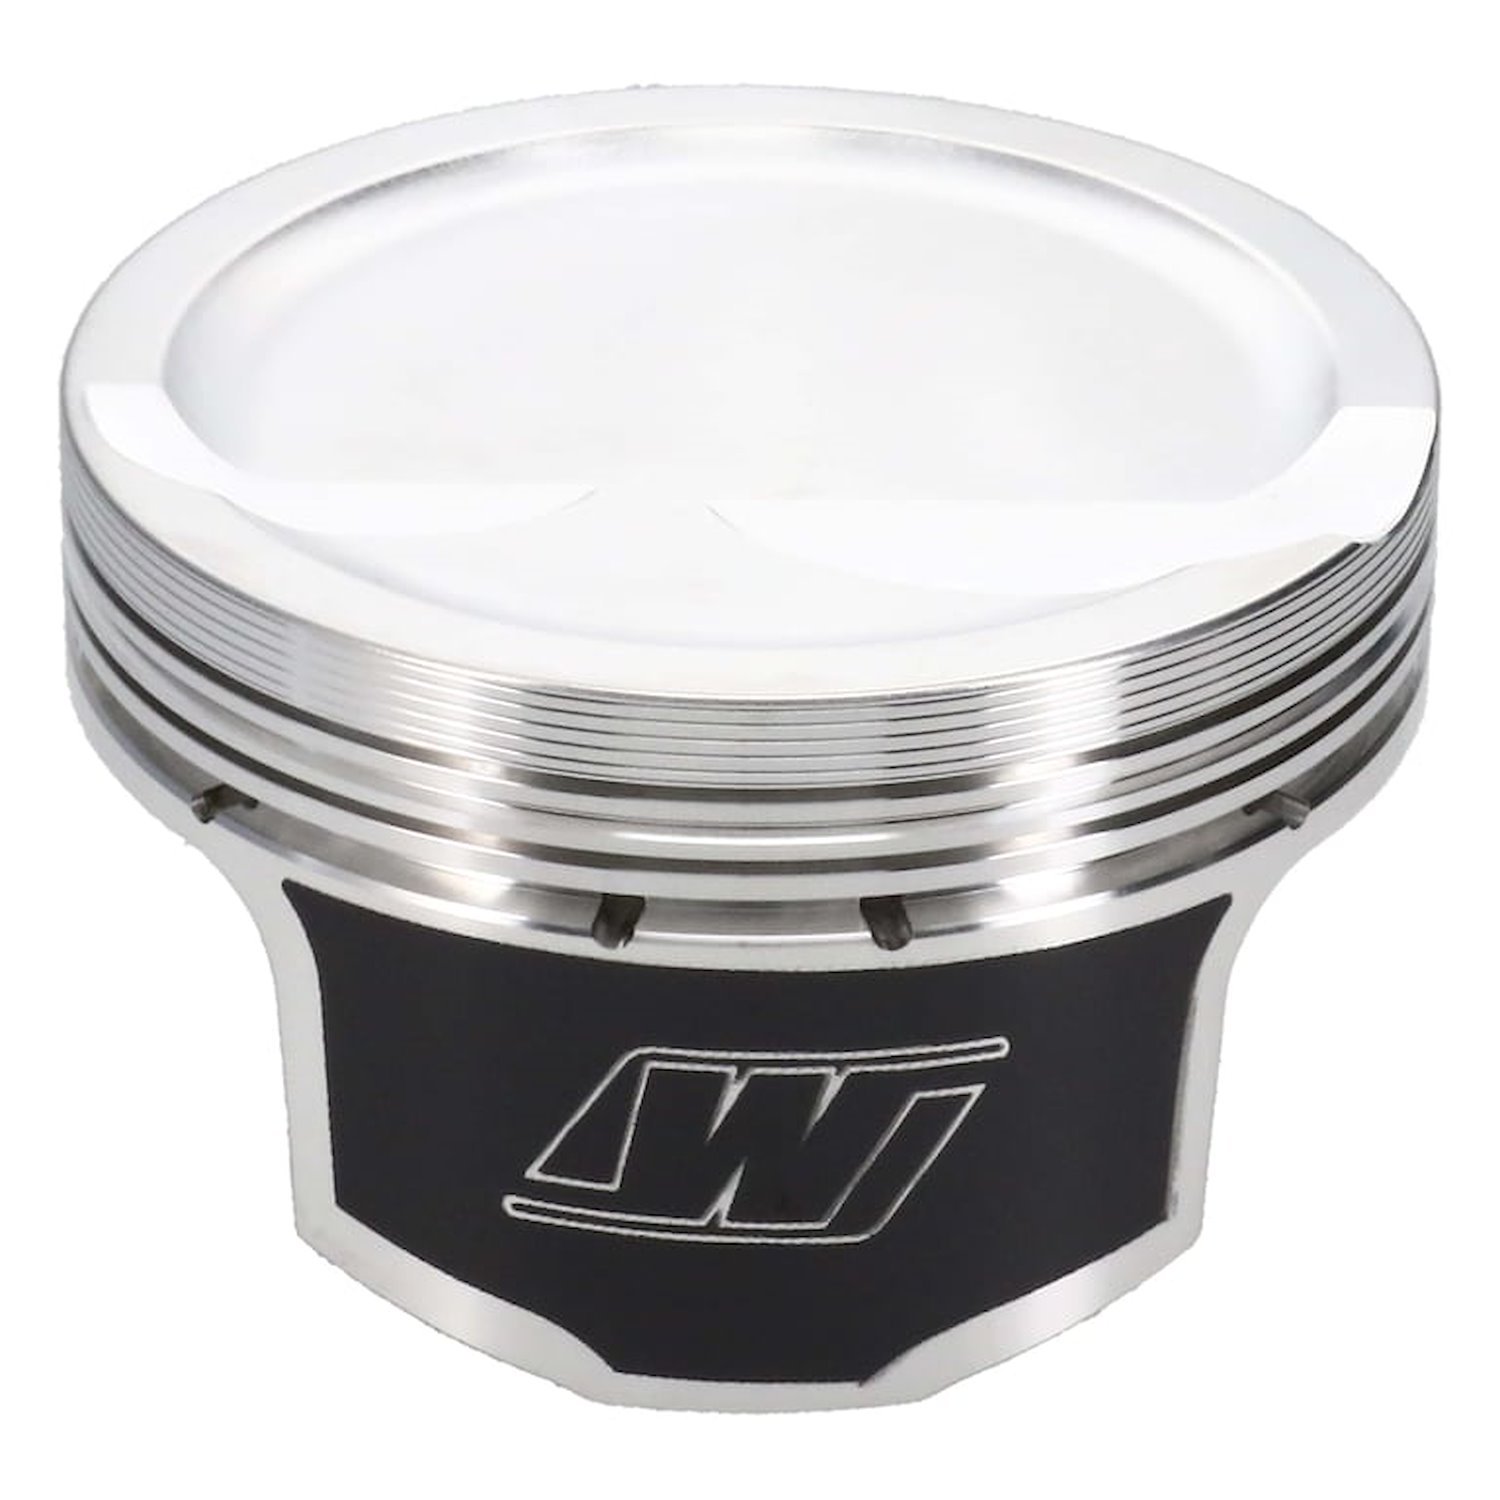 RED0081X165 RED-Series Piston Set, Chevy LS, 4.165 in. Bore, -15 cc Dish